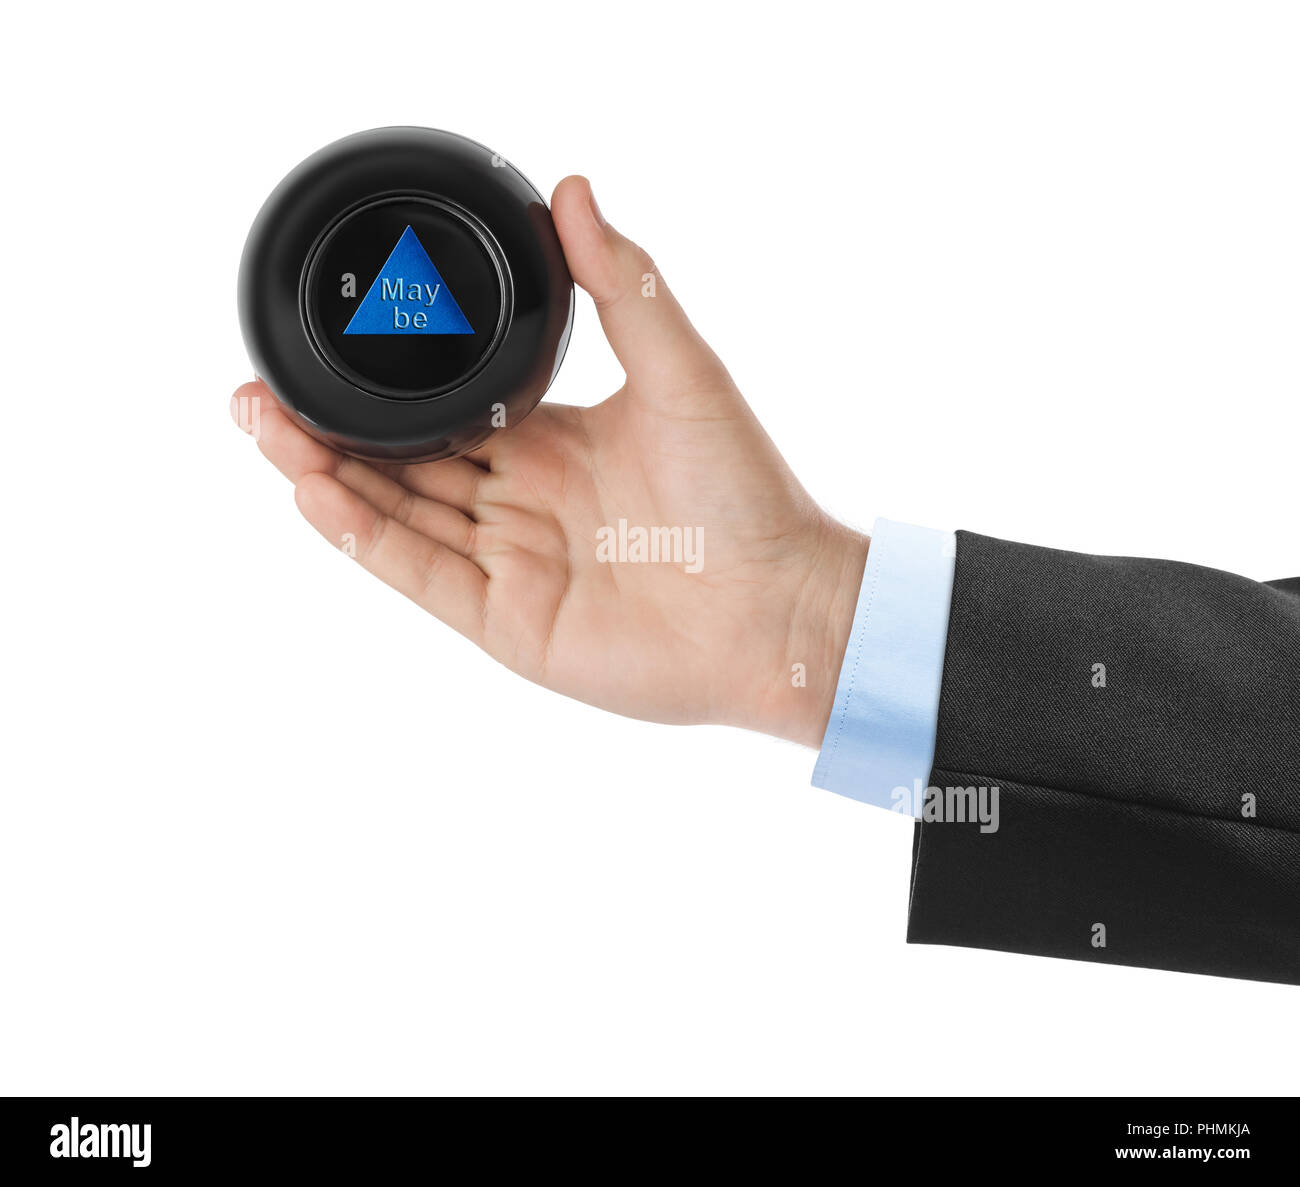 Magic ball with prediction Maybe in hand Stock Photo